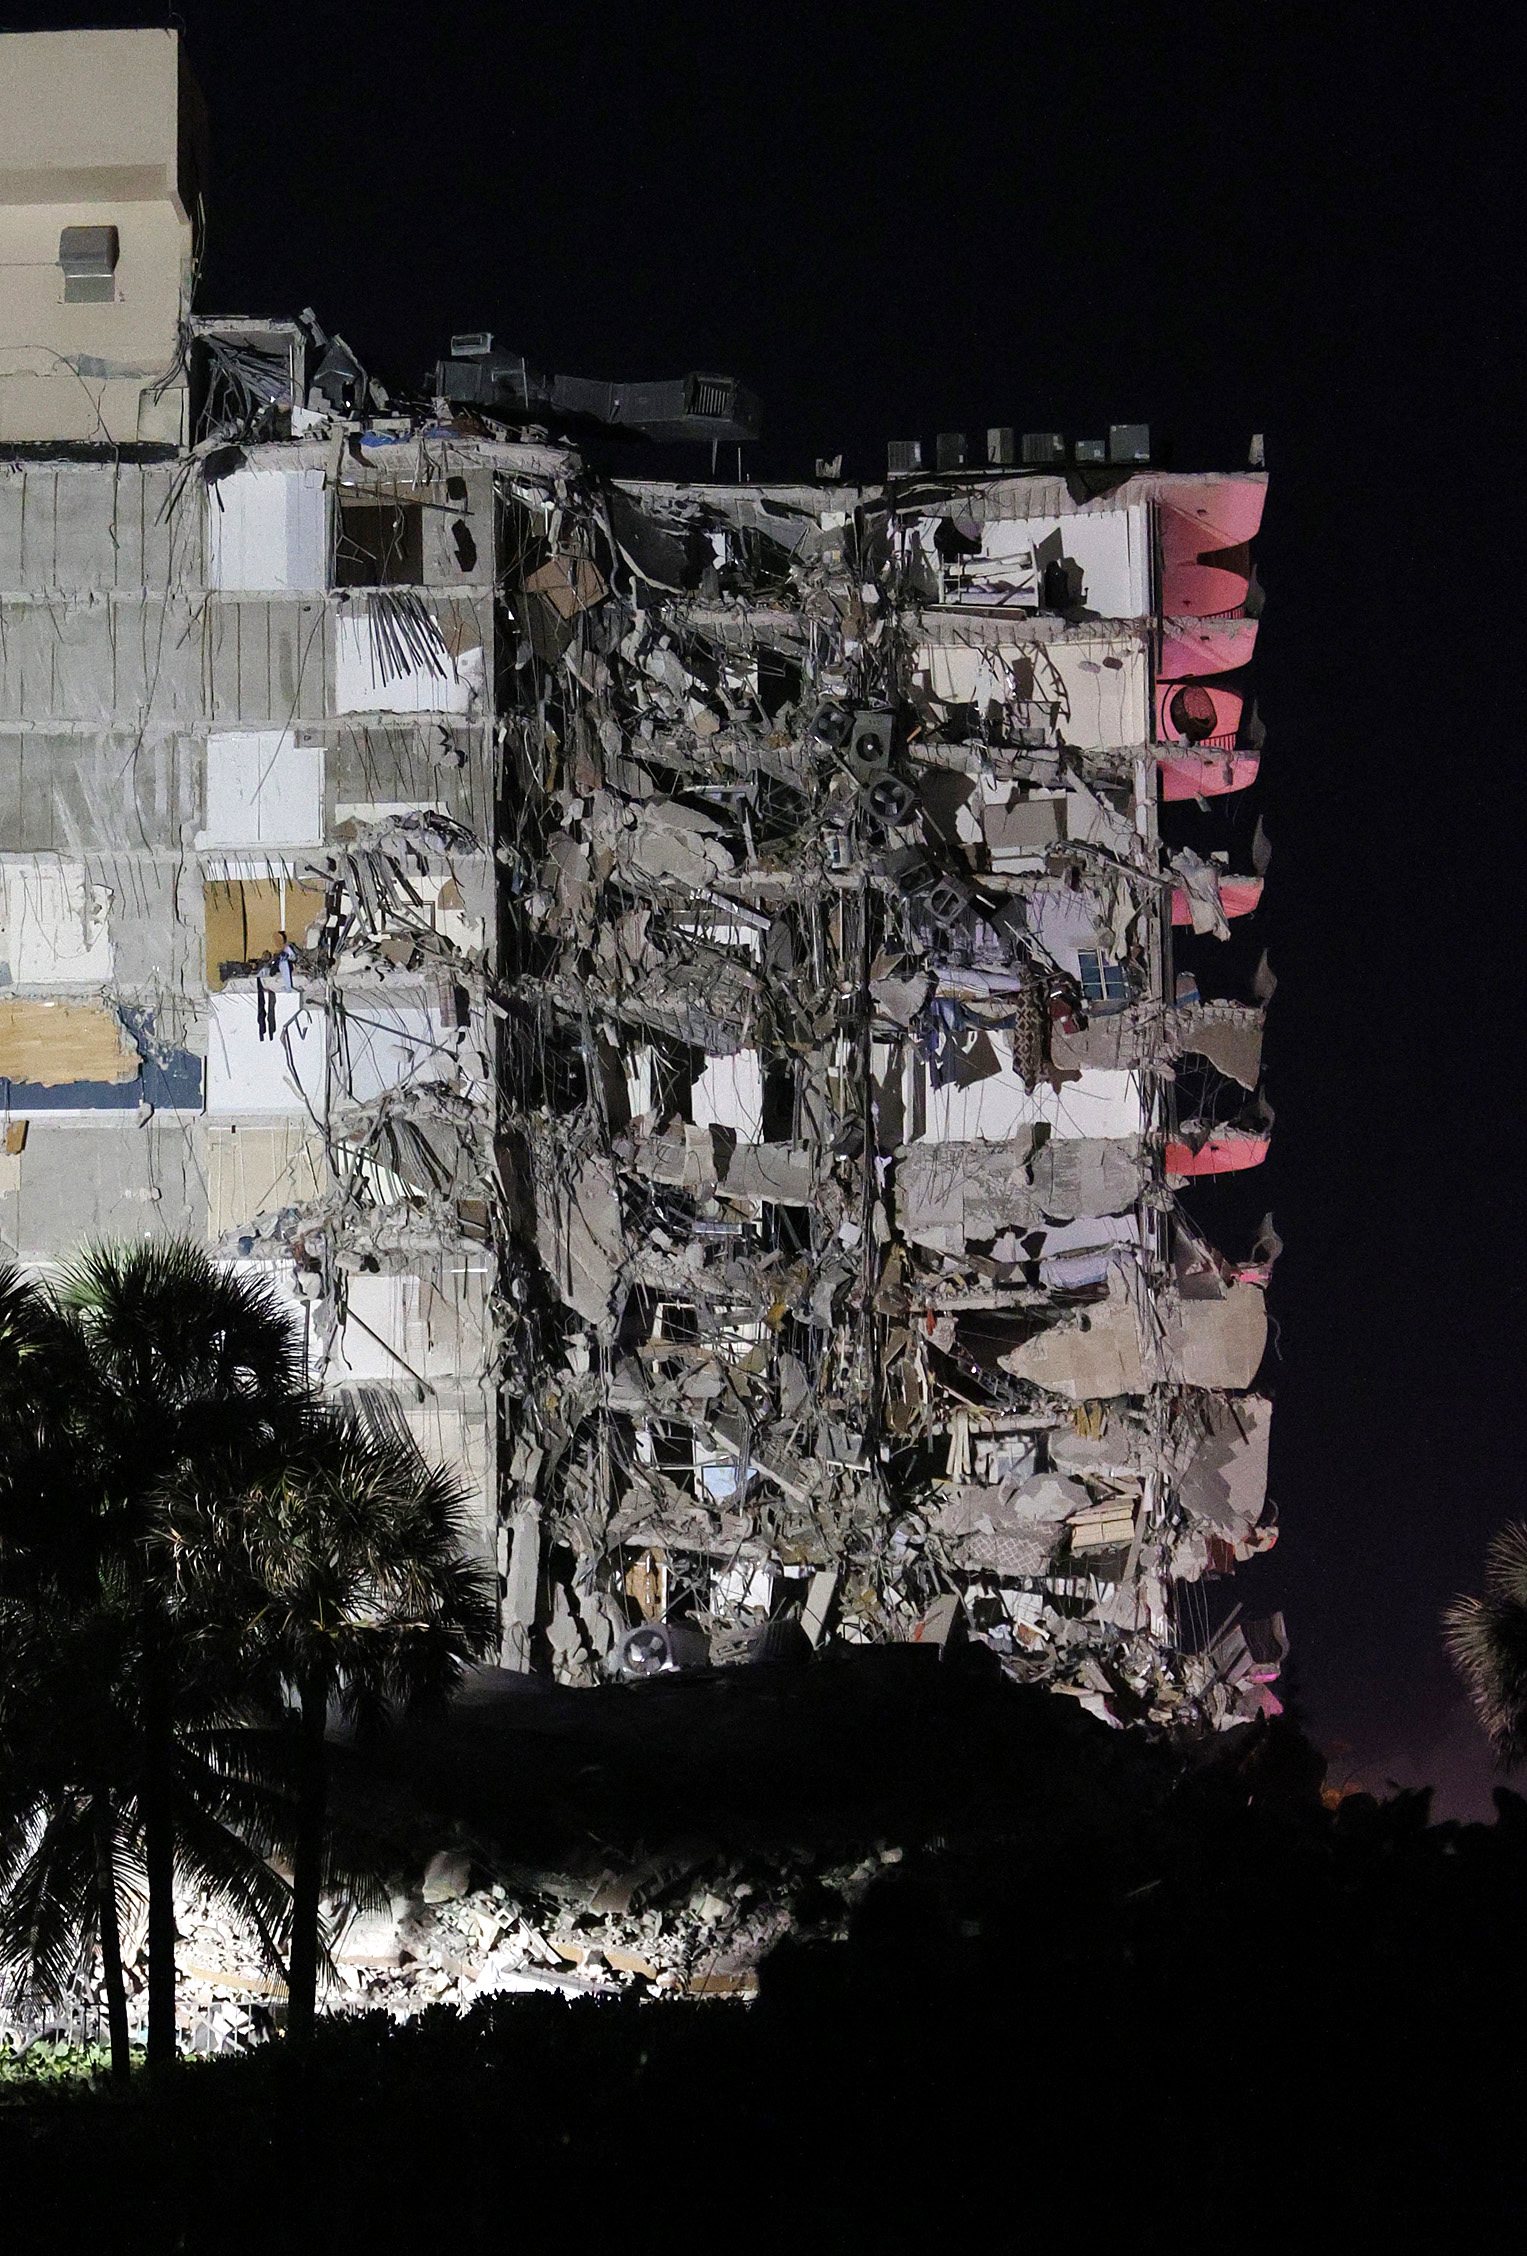 Residential Building In Miami Partially Collapsed